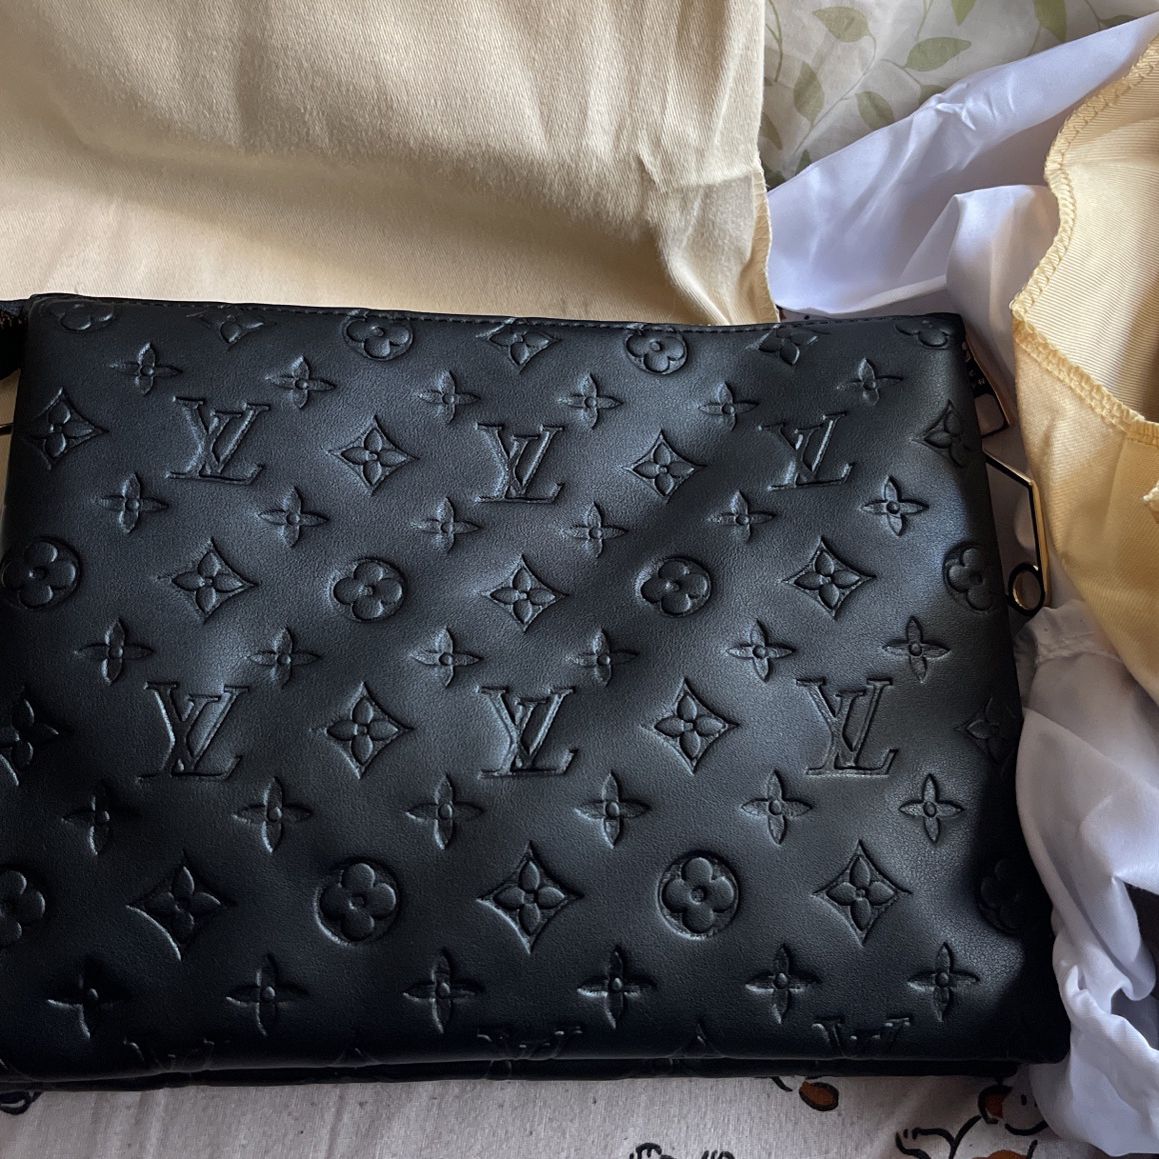 Louis vuitton purses with small purse and change pocket real for Sale in  San Bernardino, CA - OfferUp